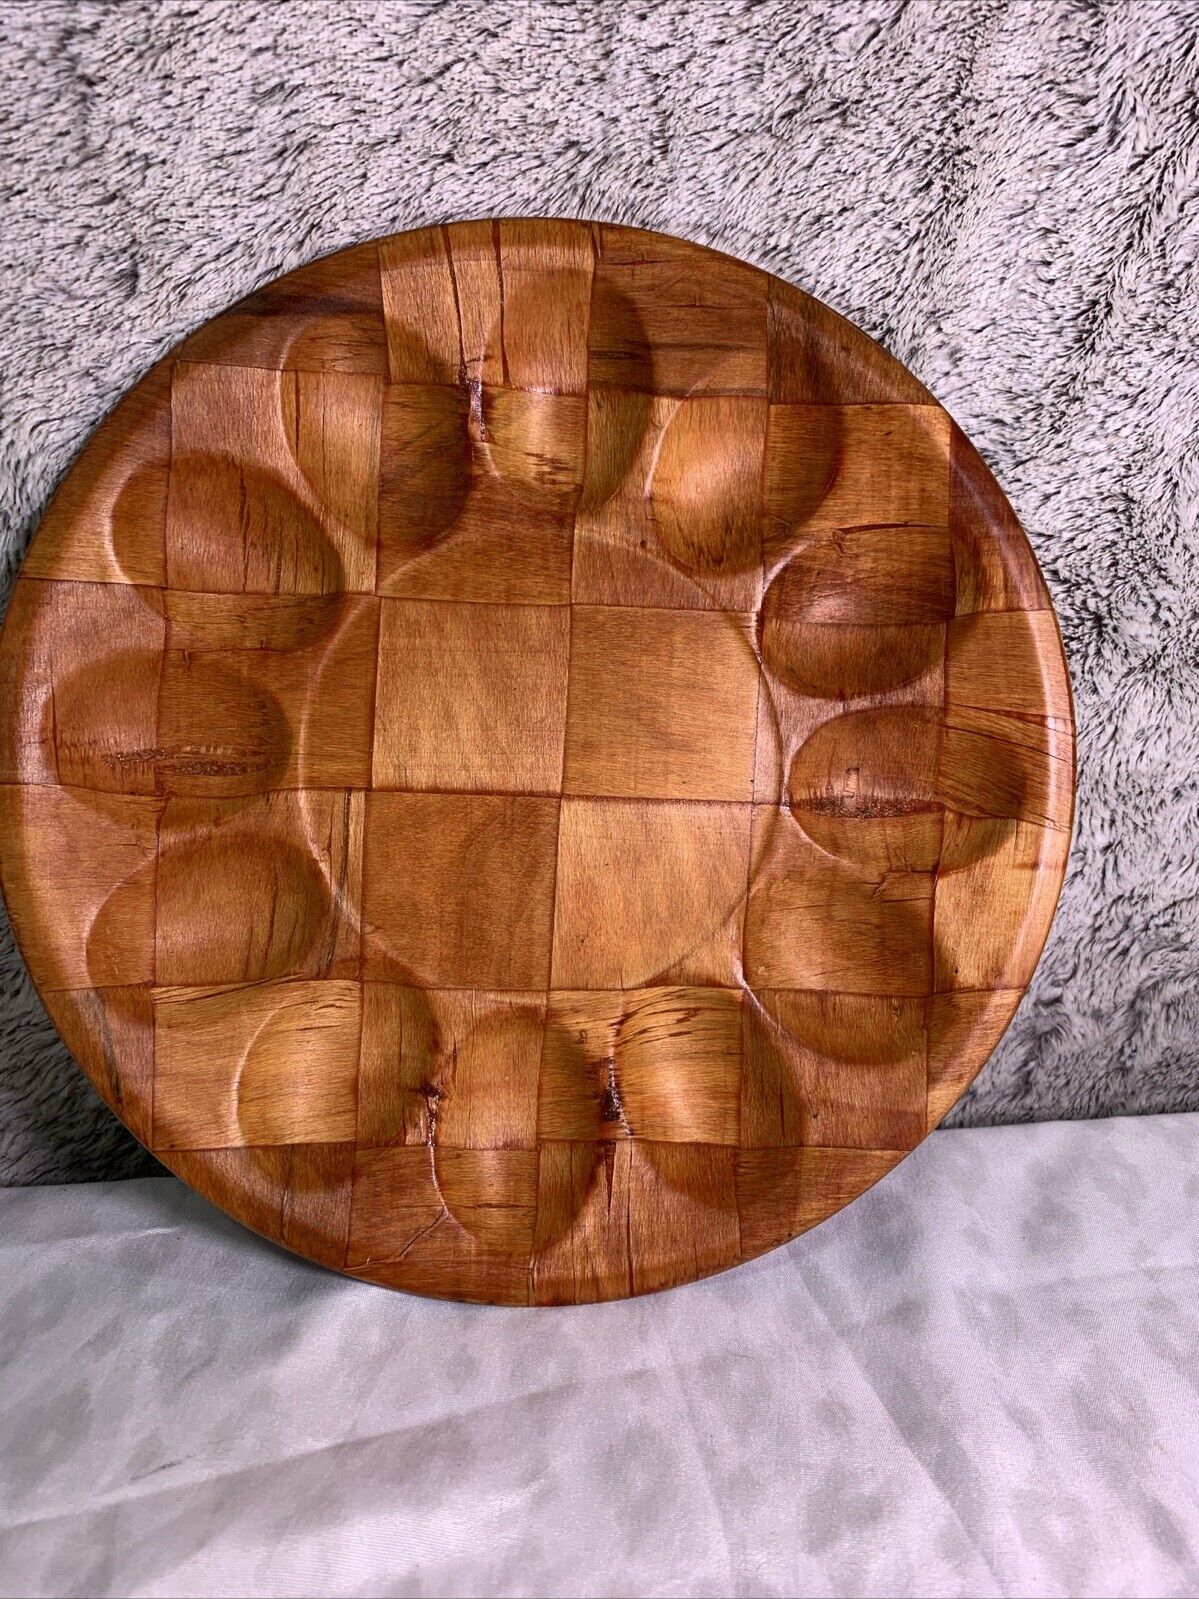 Vintage Woven Wood Deviled Egg Round Serving Tray Retro MCM 1960s, Holds 12